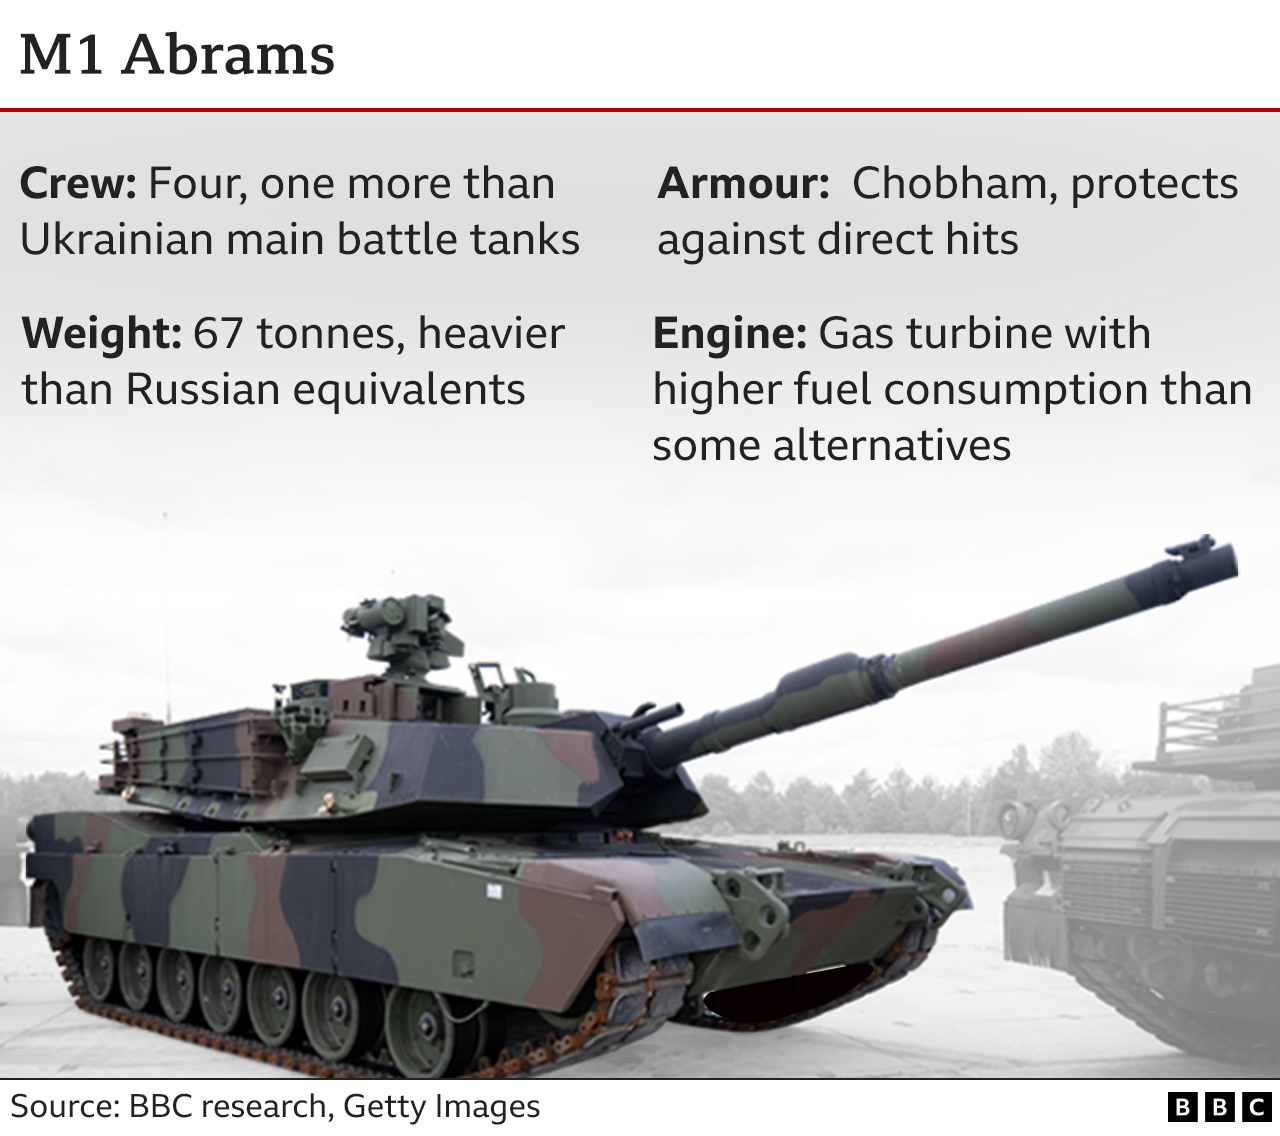 Graphic showing details of the US M1 Abrams tank. Updated 24 Jan